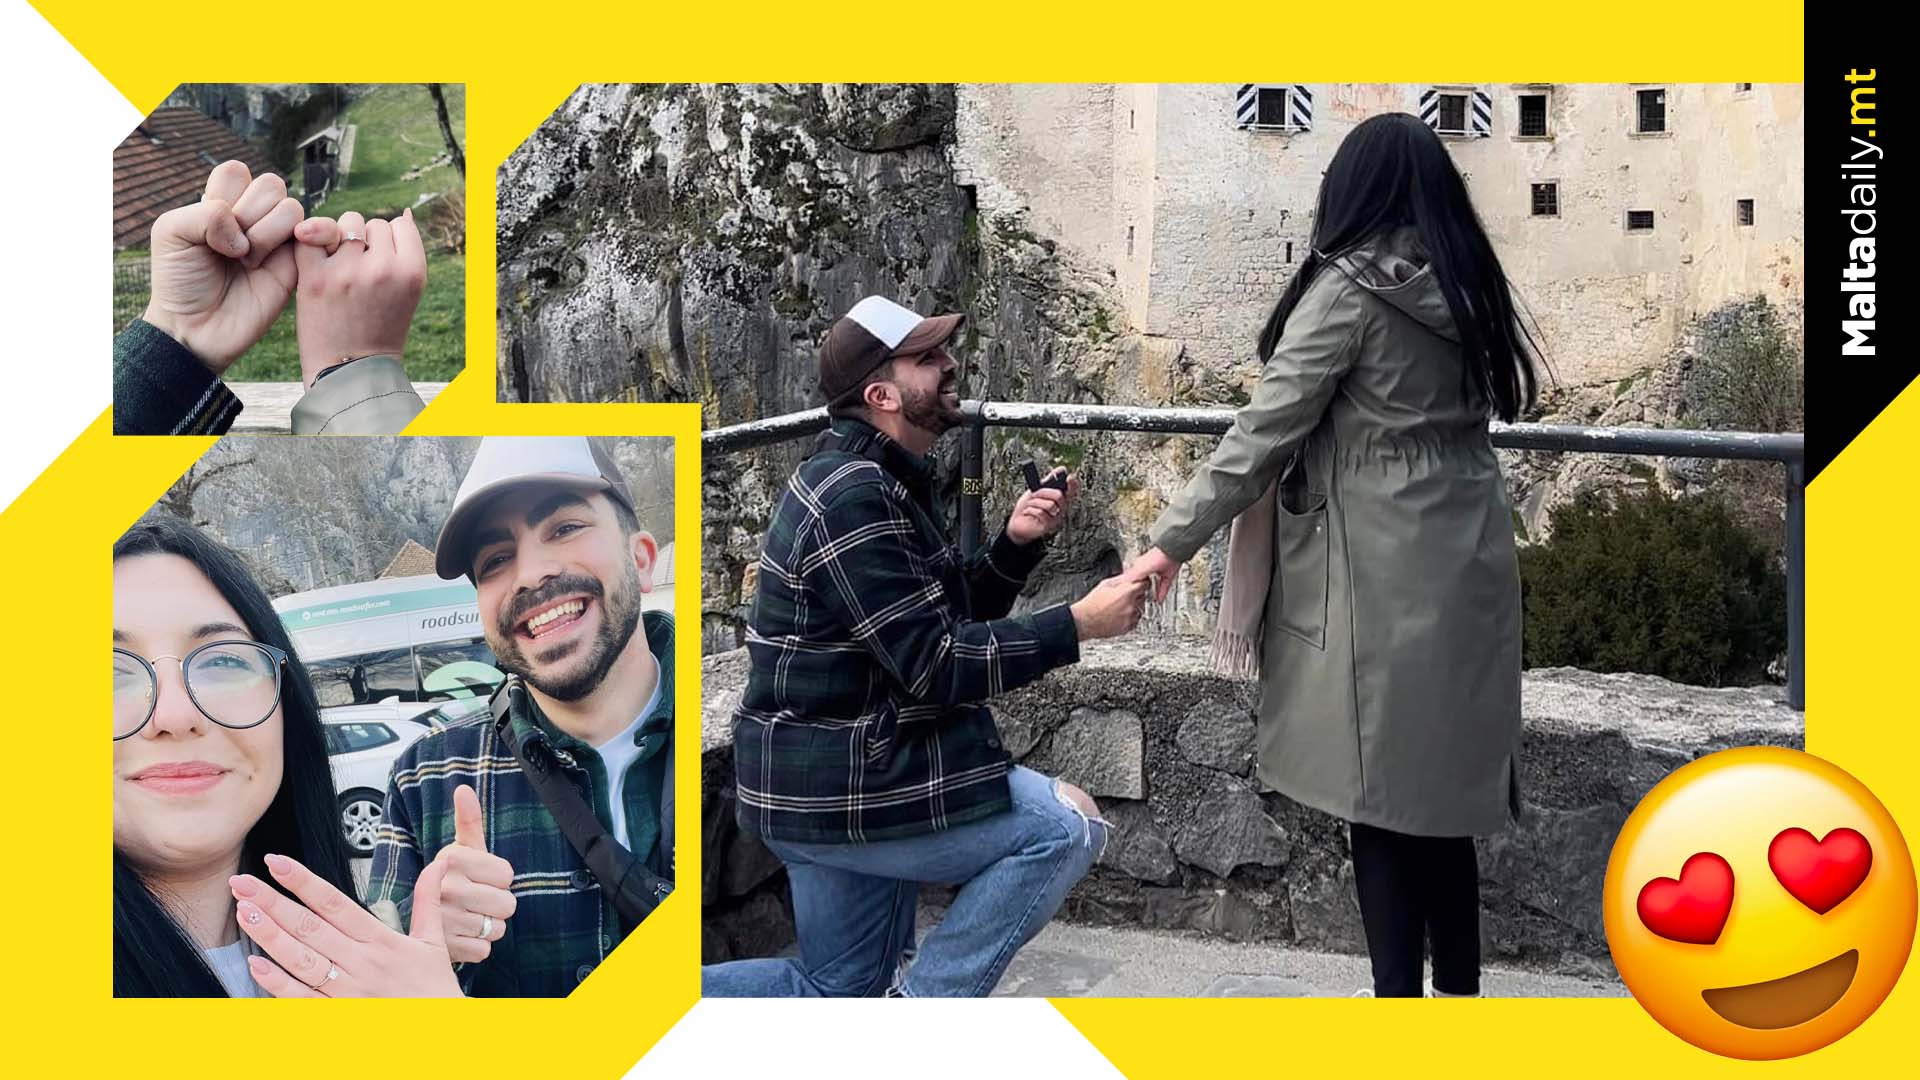 DJ Debrii is officially engaged! Daniel pops the question in Slovenia